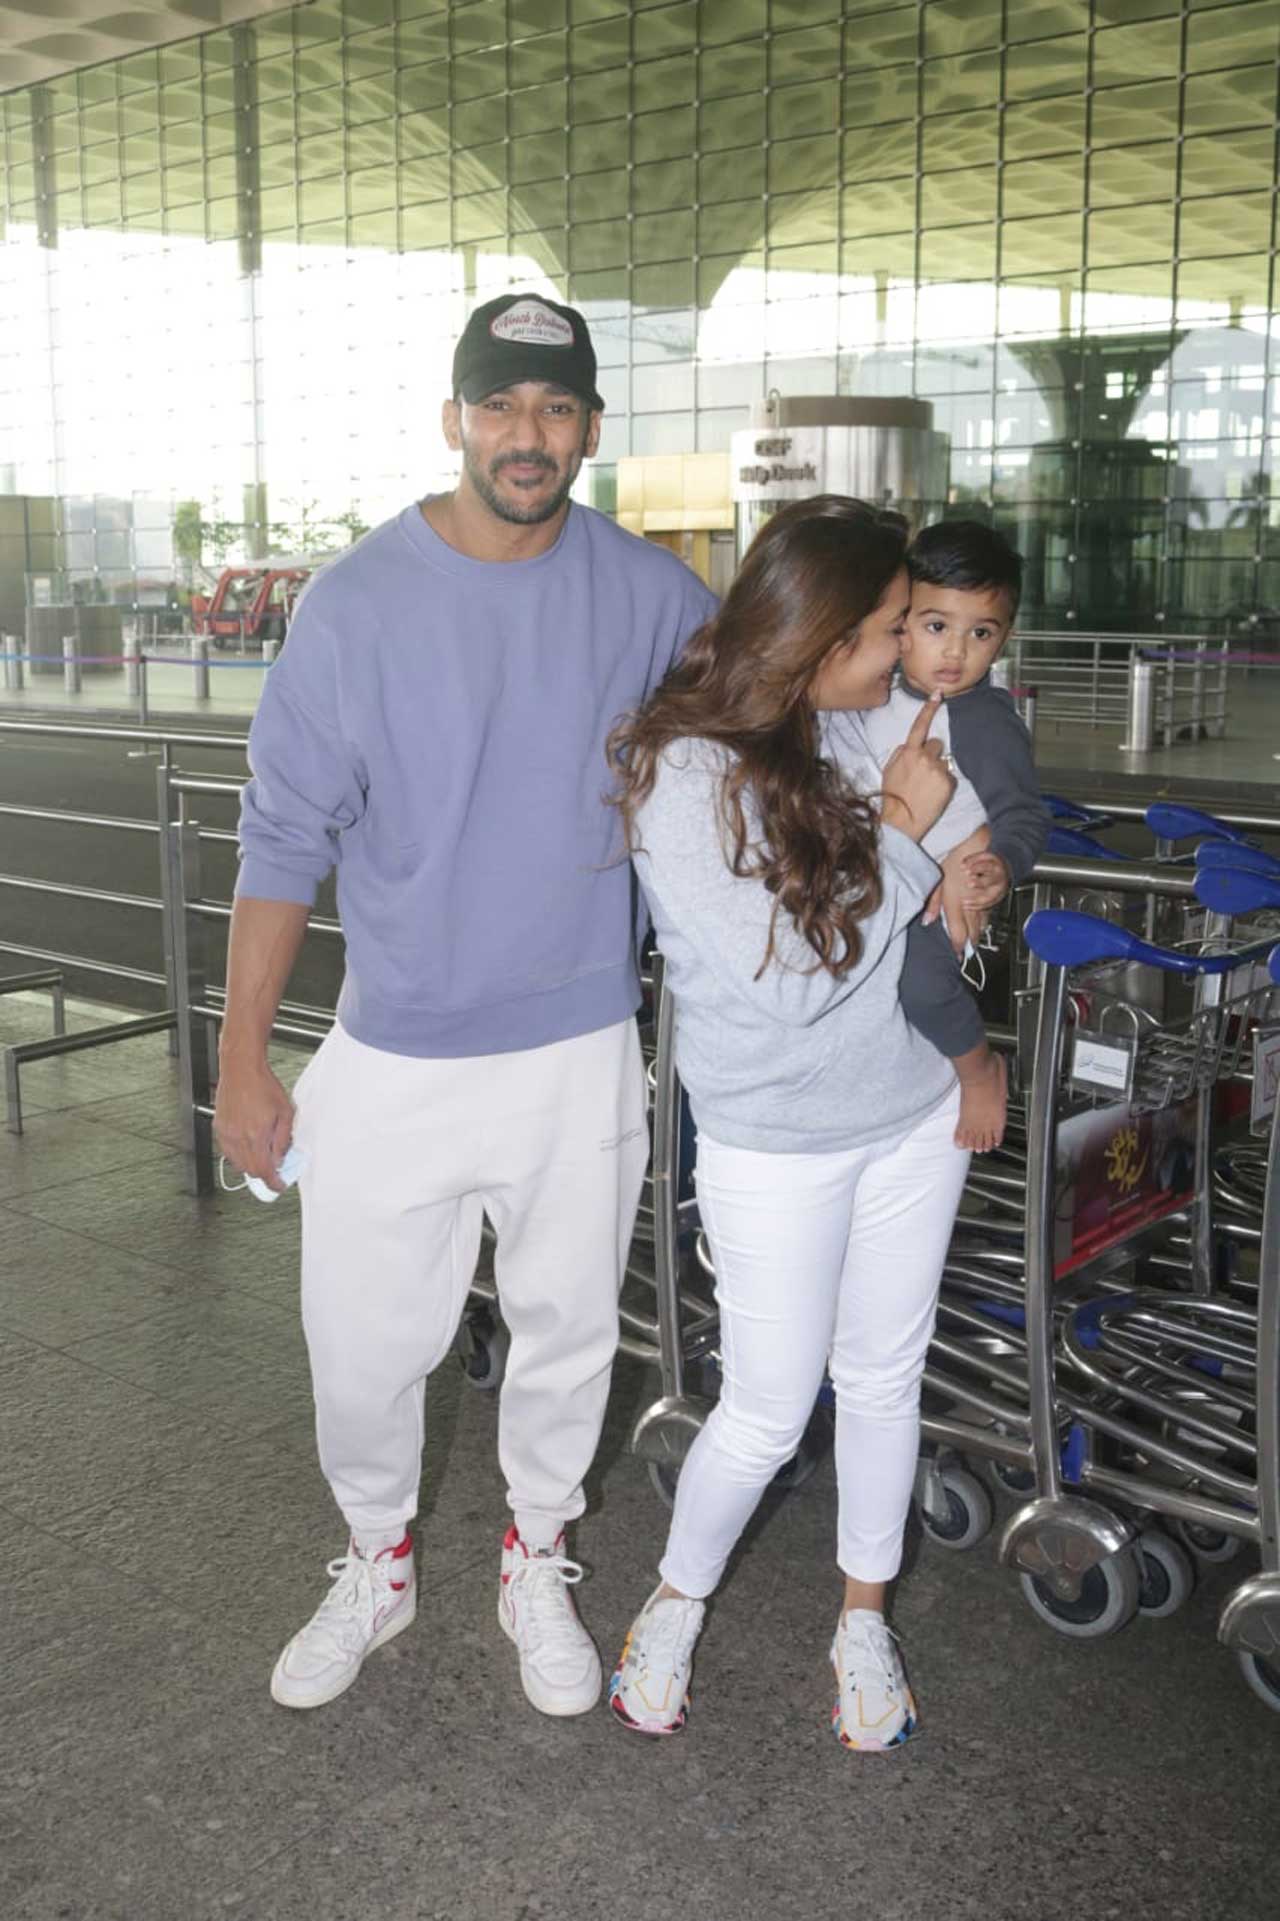 It was a hugs and kisses galore as little Aaravv seemed to be conscious of the attention he was getting from the paparazzi at the airport. Mommy Anita and dad Rohit made sure their baby boy felt comfortable amidst the crowd.